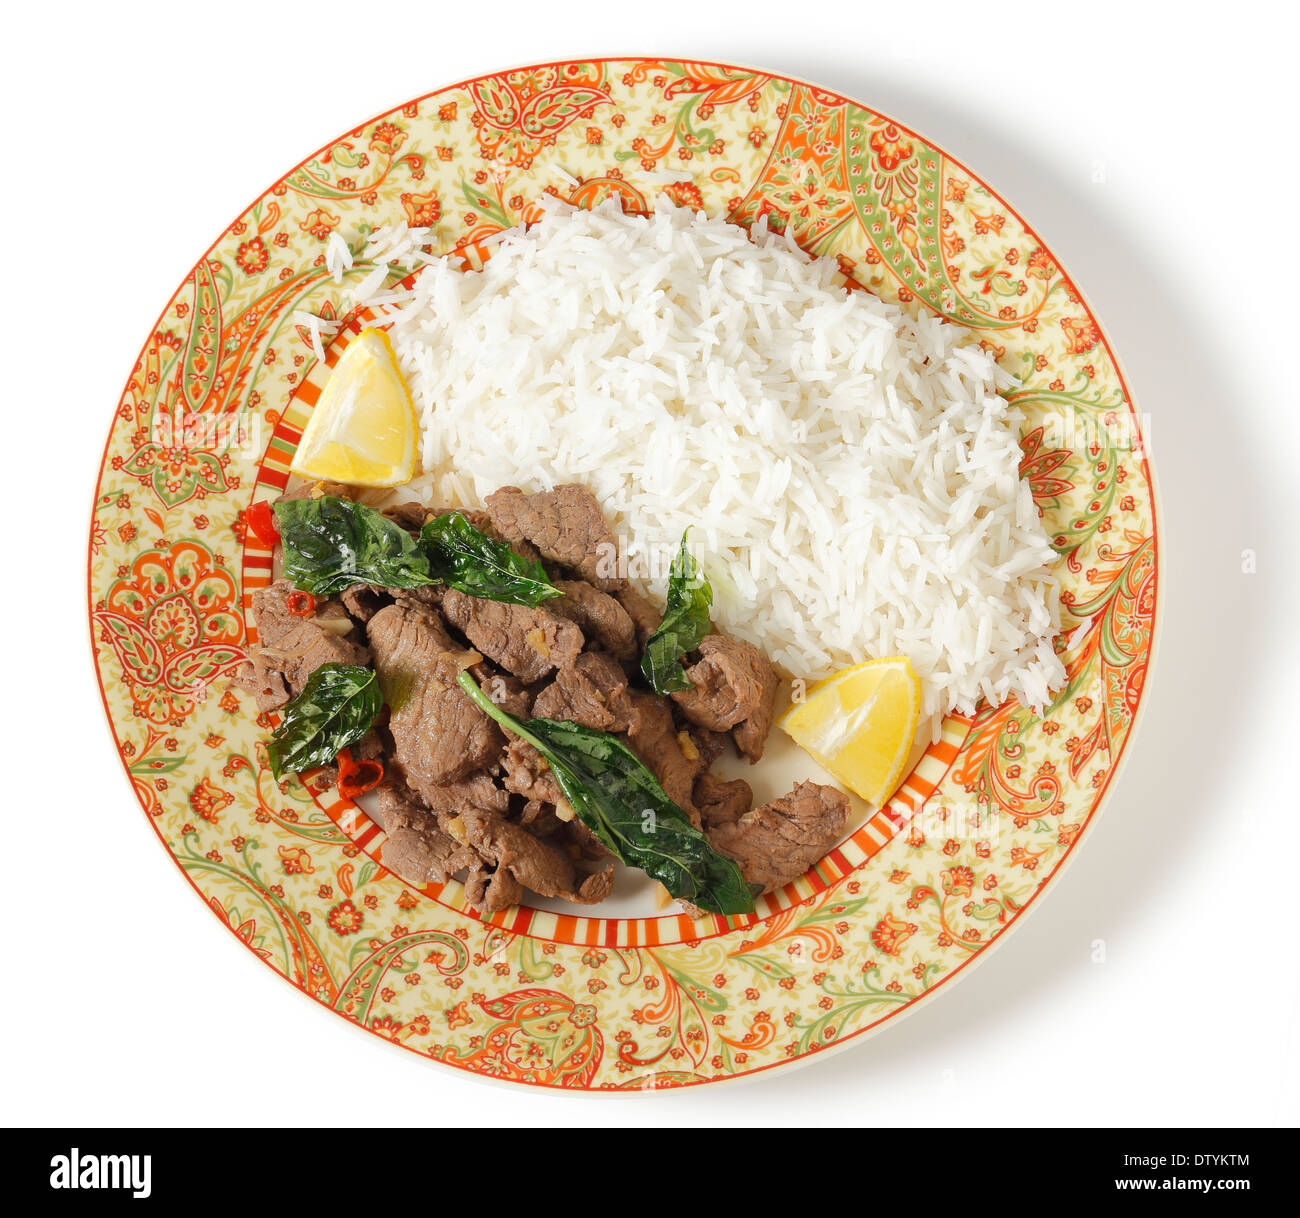 Chilli beef with crispy fried basil leaves, served with white basmati rice and lemon wedges, viewed from above Stock Photo